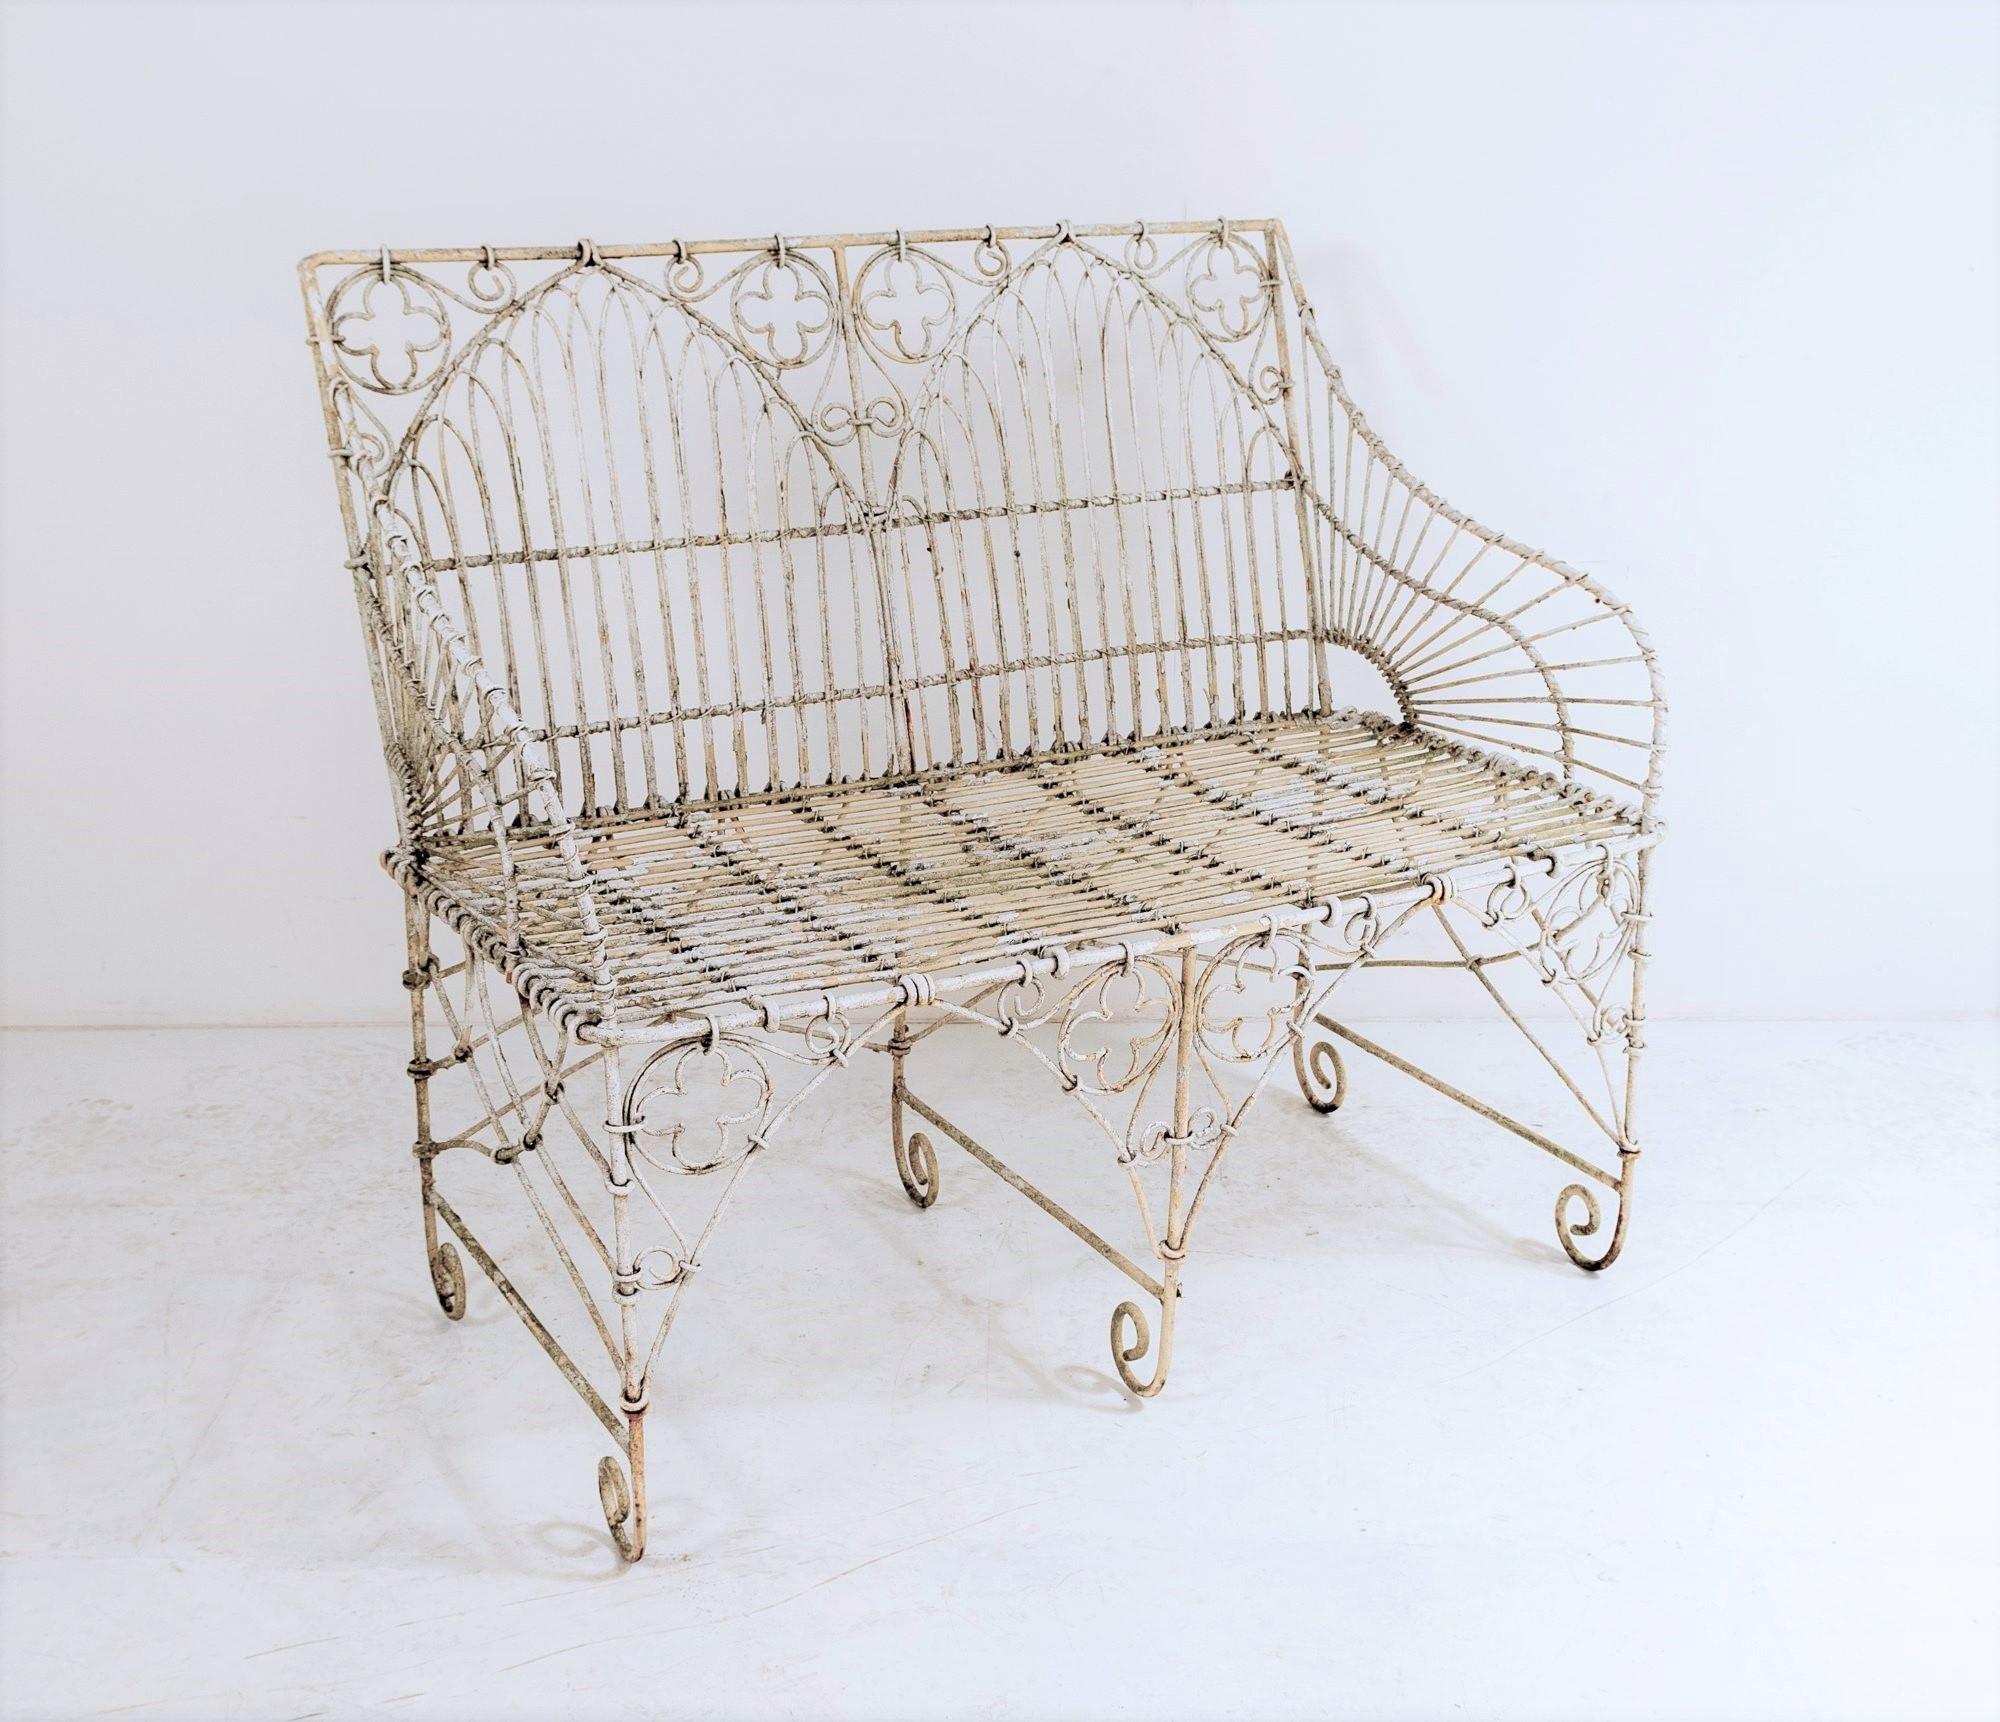 Gothic Revival English Garden Bench Wrought Iron Style Wirework Seat with Weathered Patina